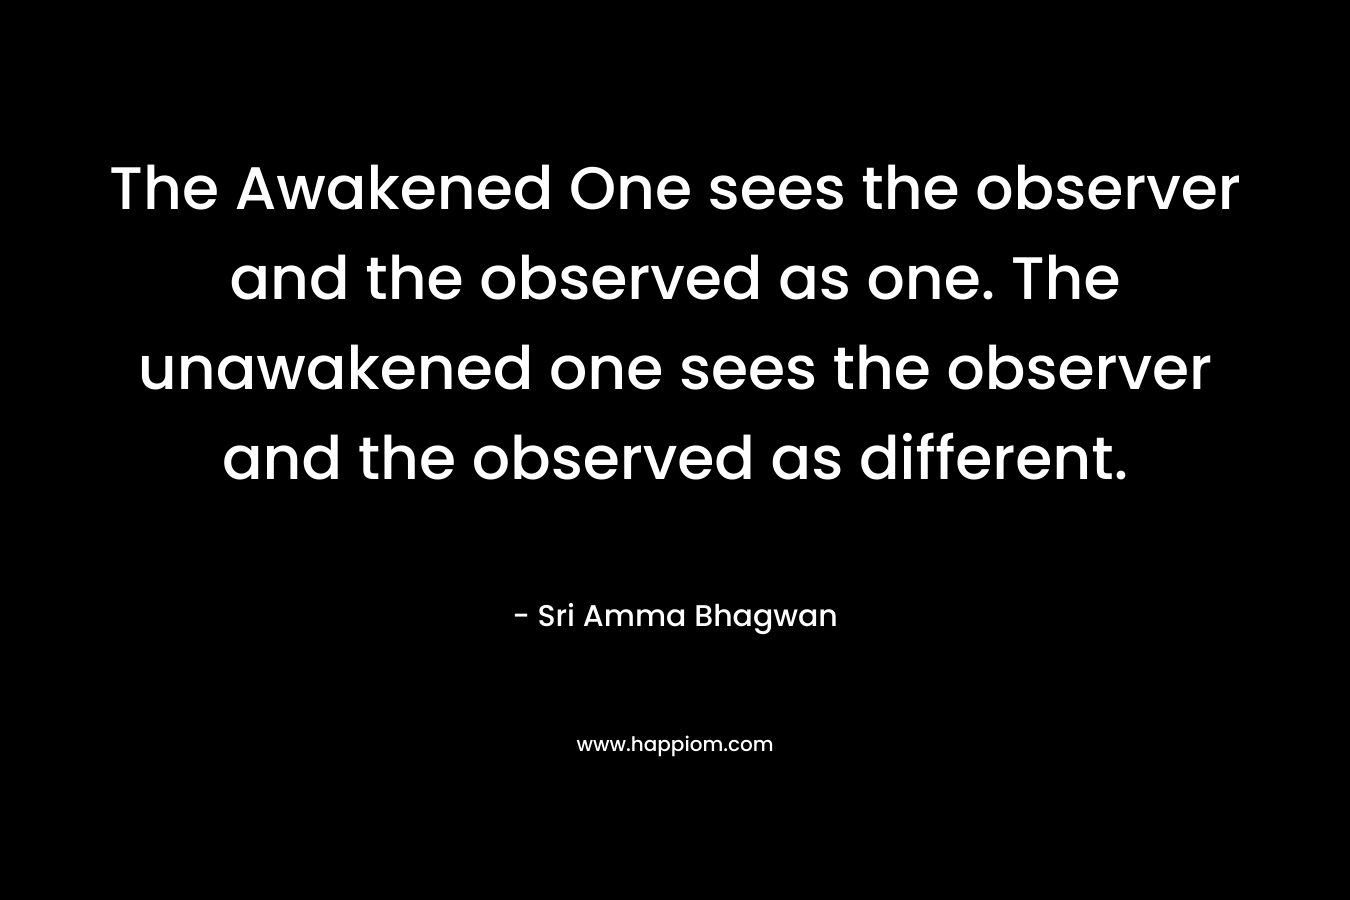 The Awakened One sees the observer and the observed as one. The unawakened one sees the observer and the observed as different.